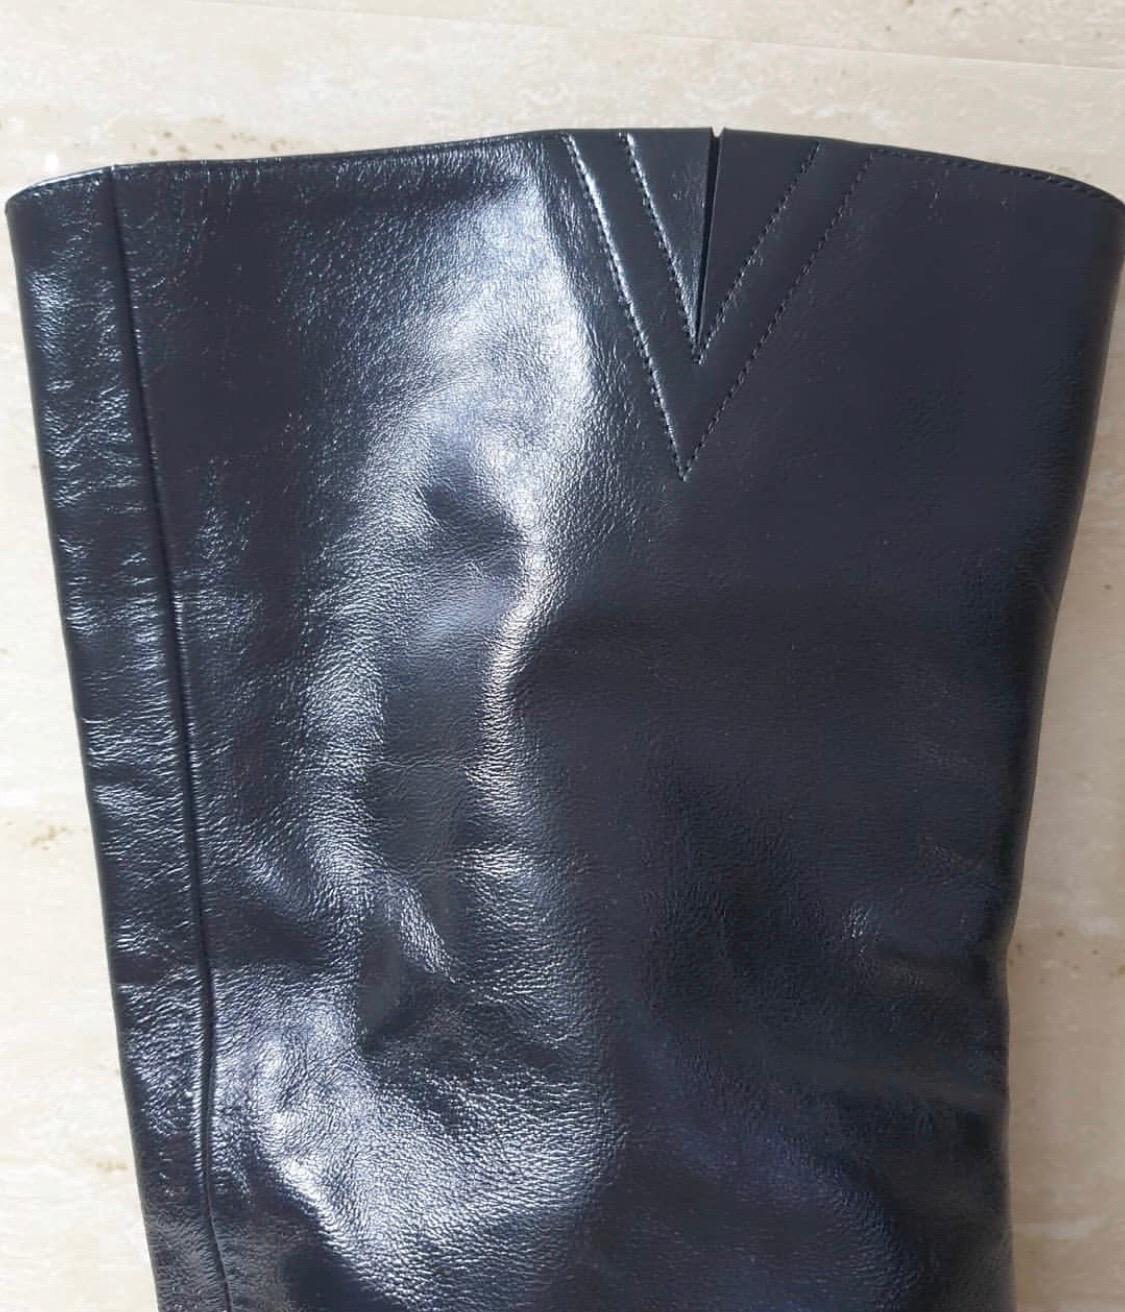 Chloé Rylee leather over-the-knee boots For Sale at 1stDibs